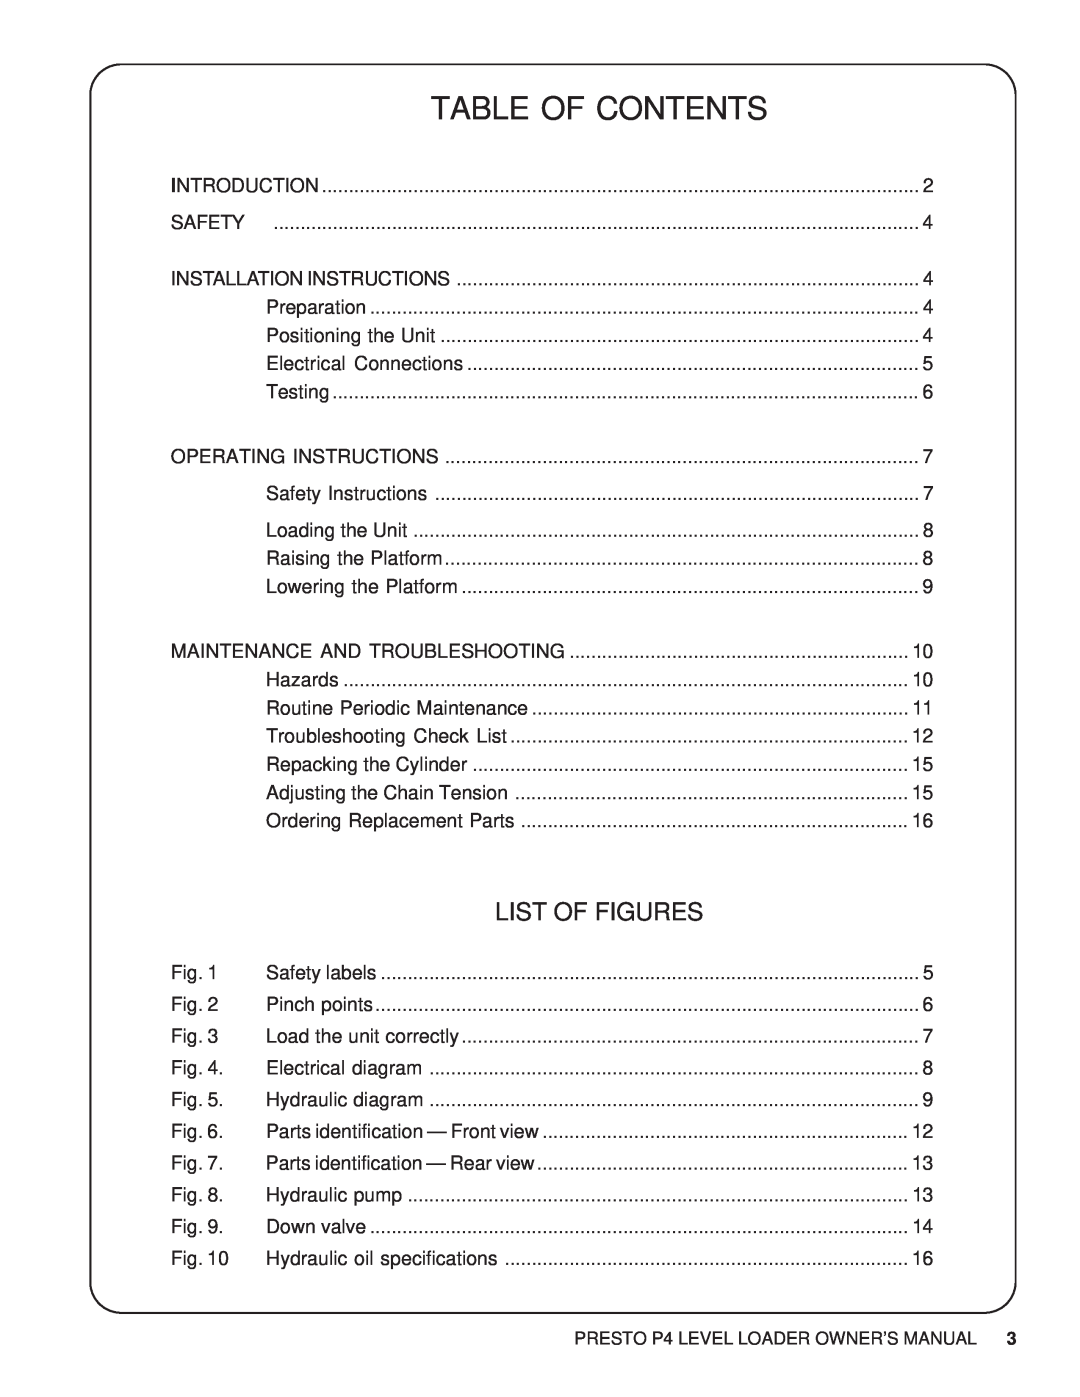 Presto P4 manual Table Of Contents, List Of Figures 